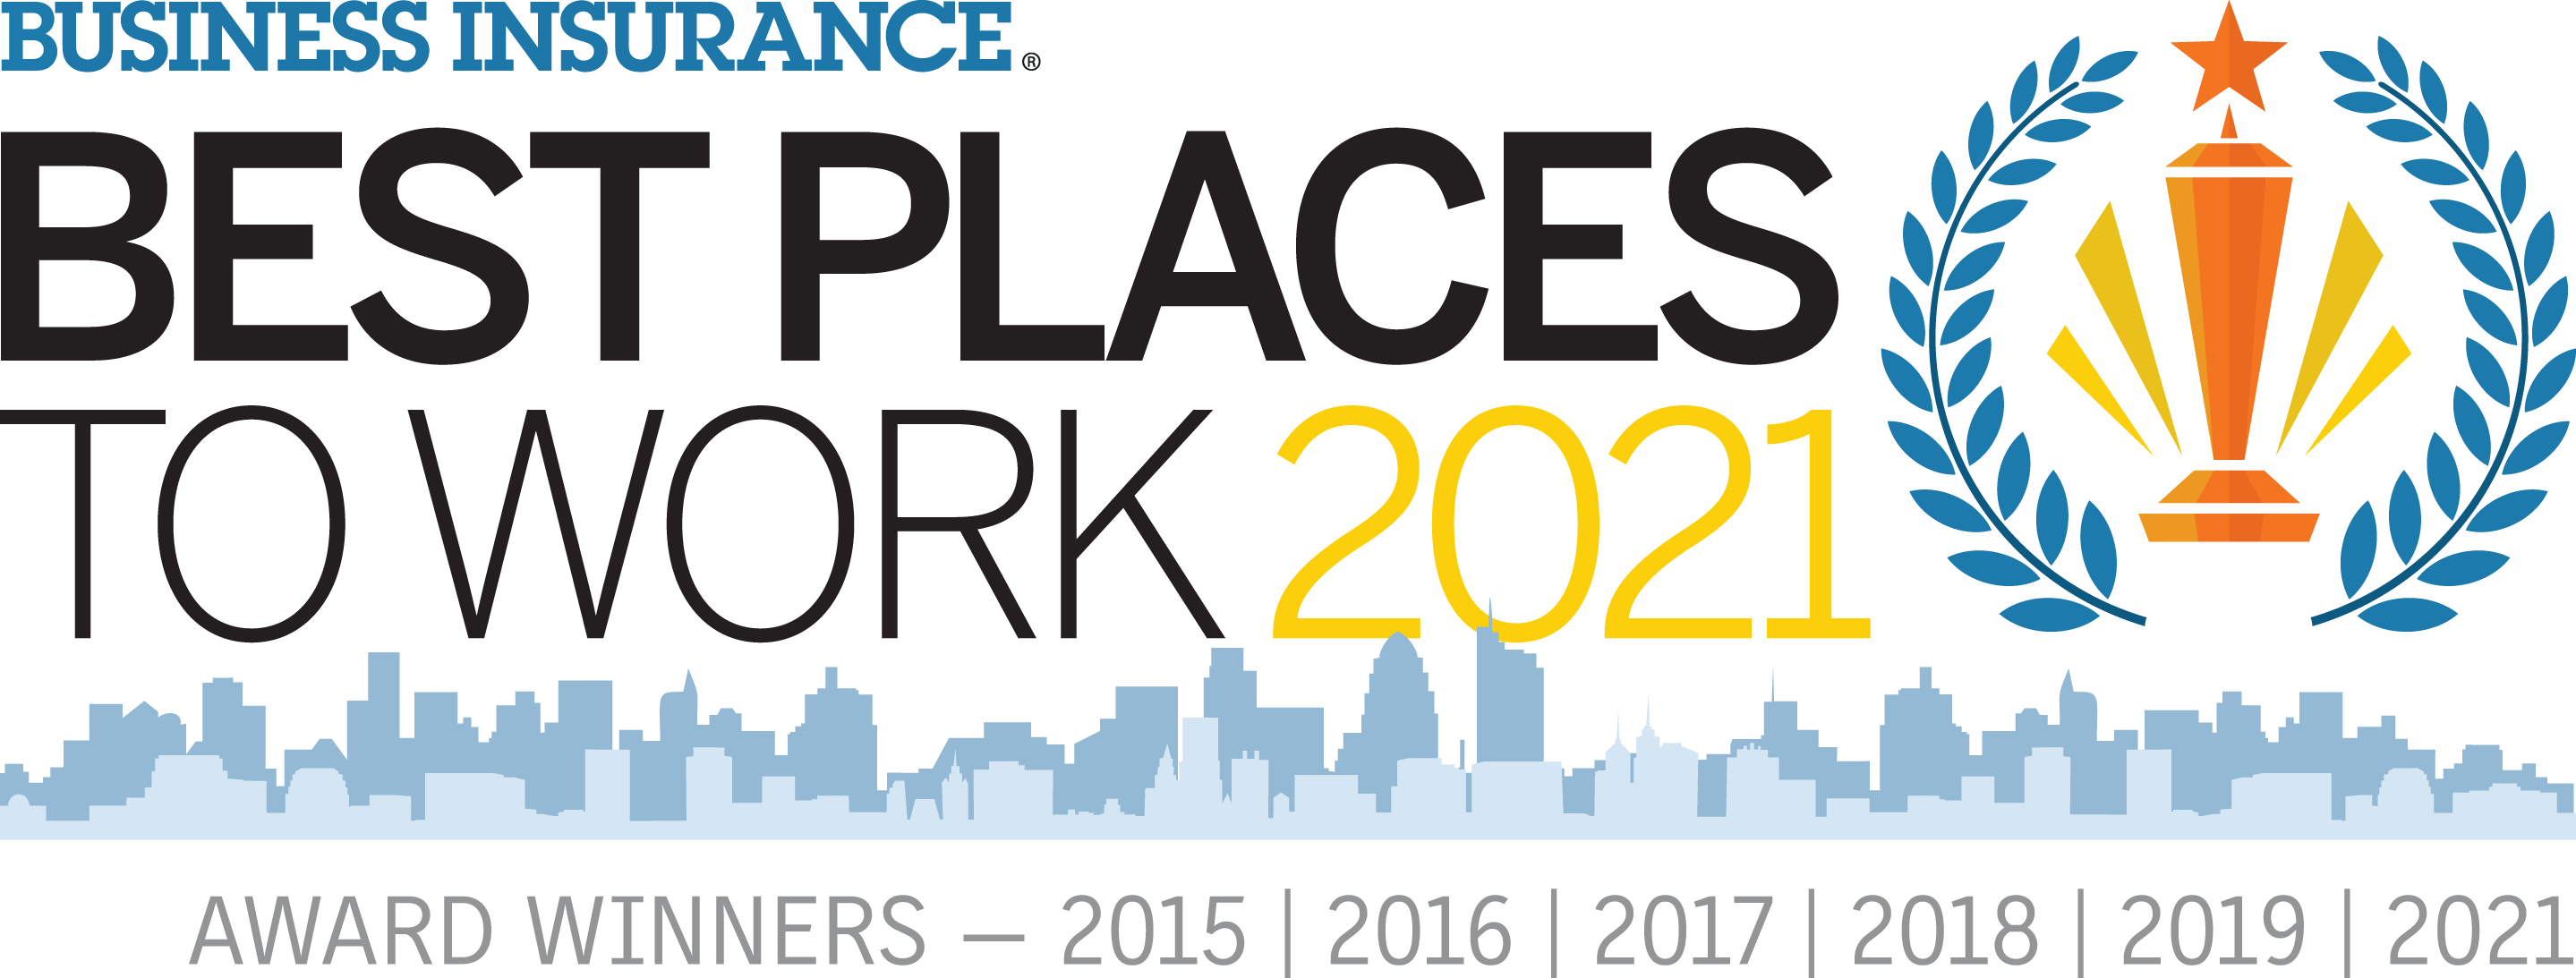 best place to work 2021